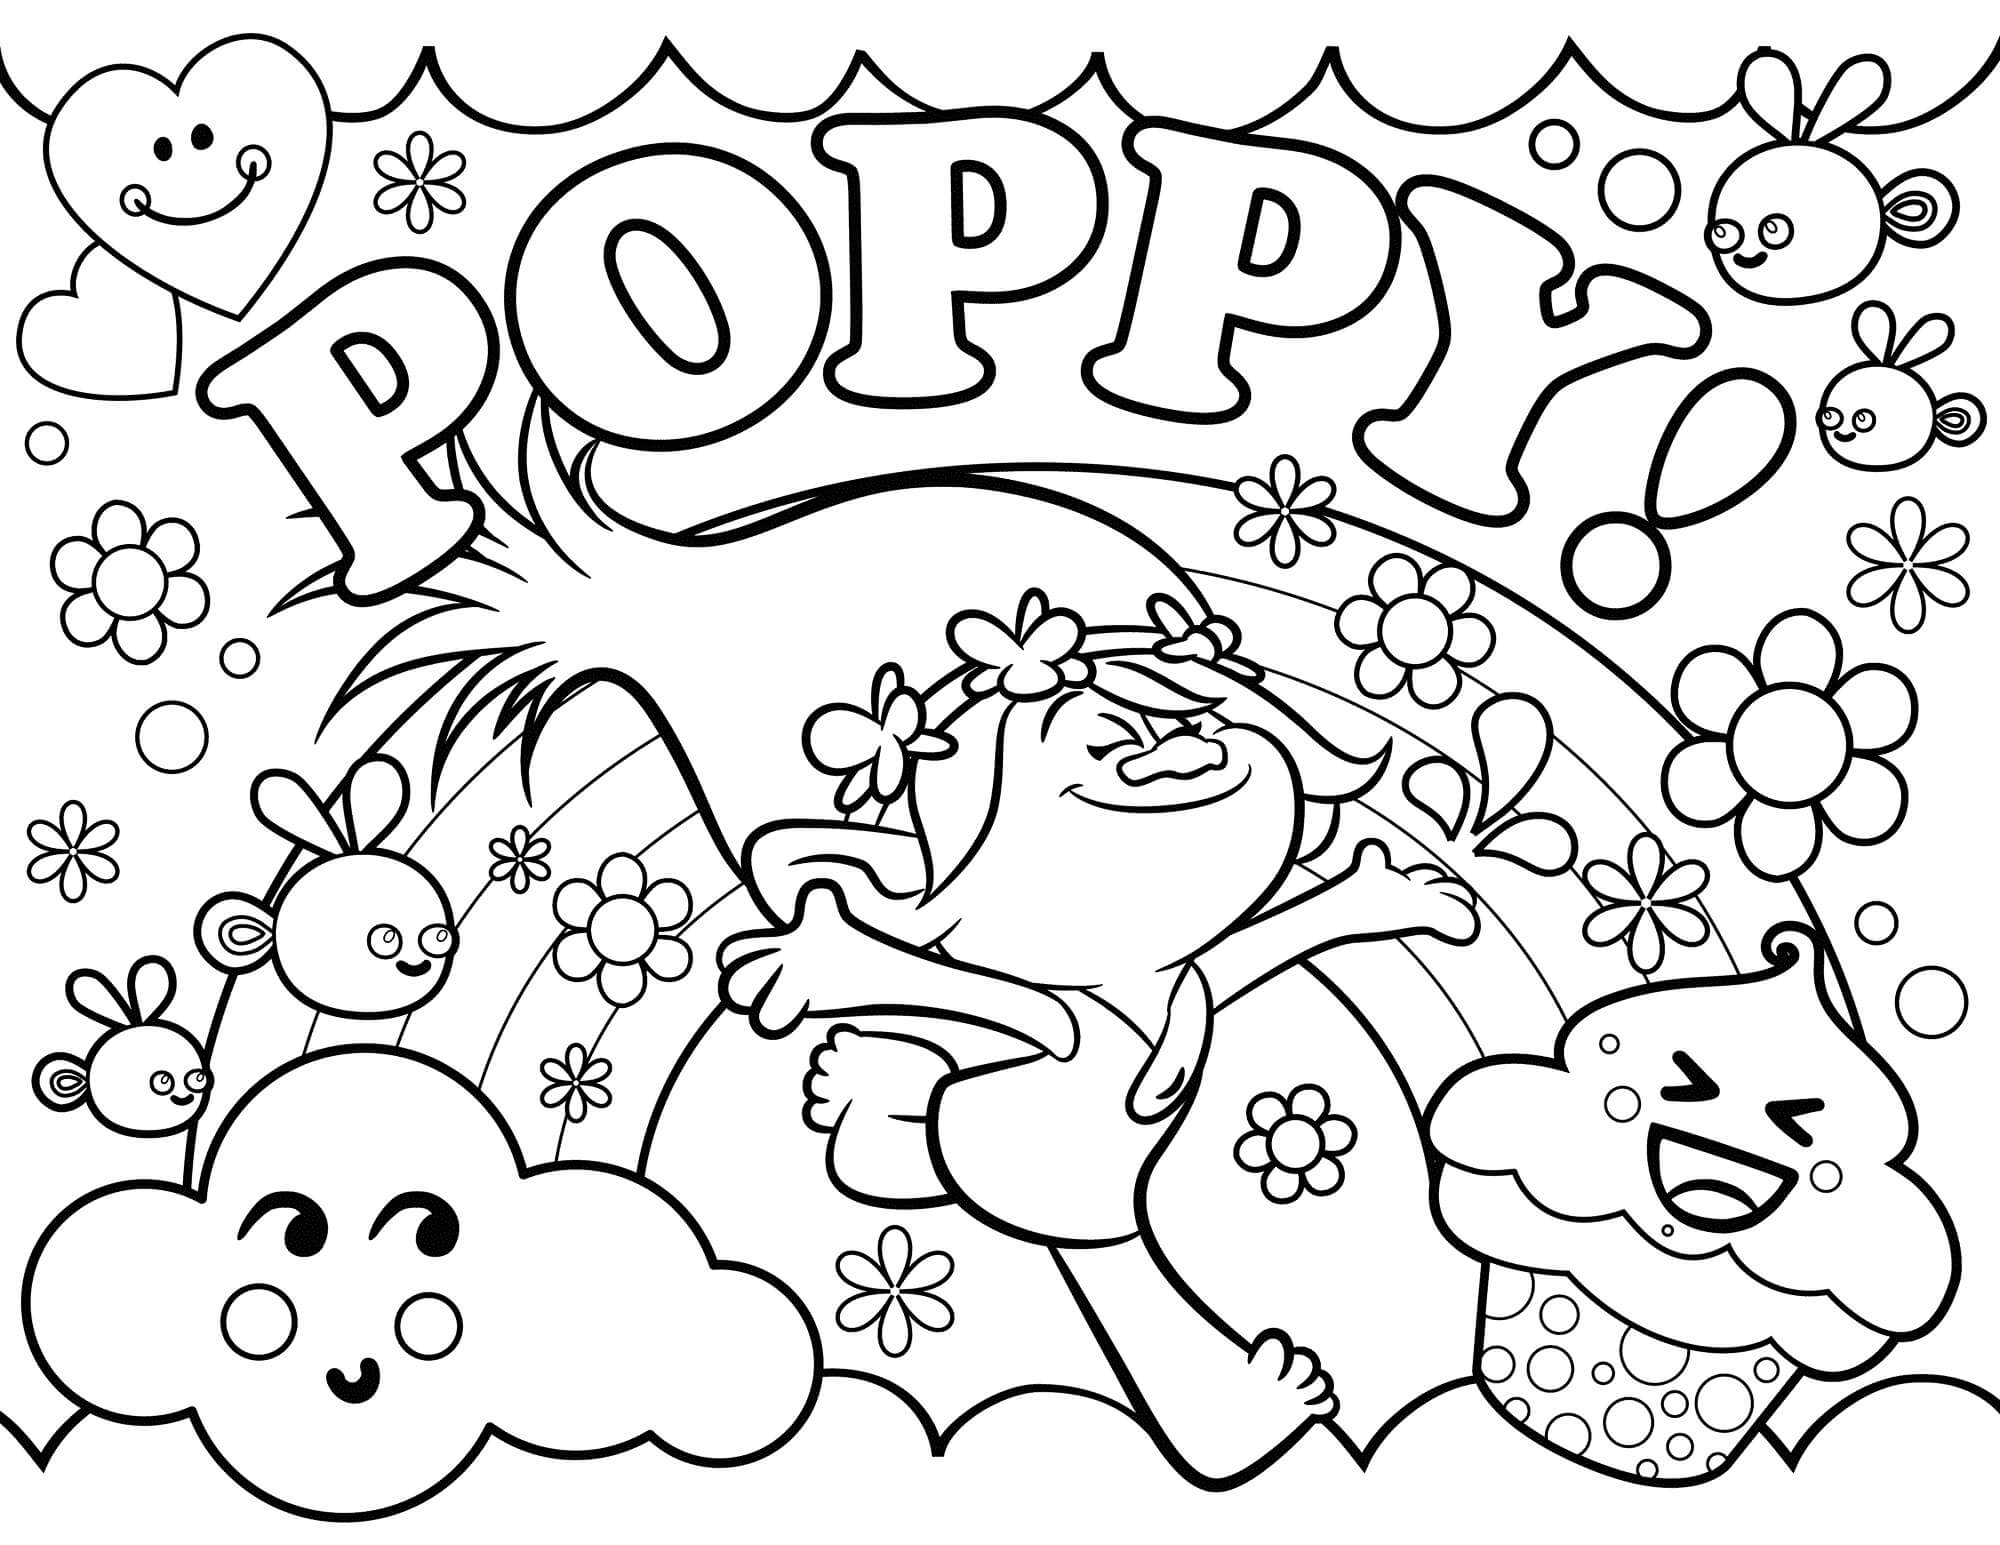 Poppy and Friends para colorir